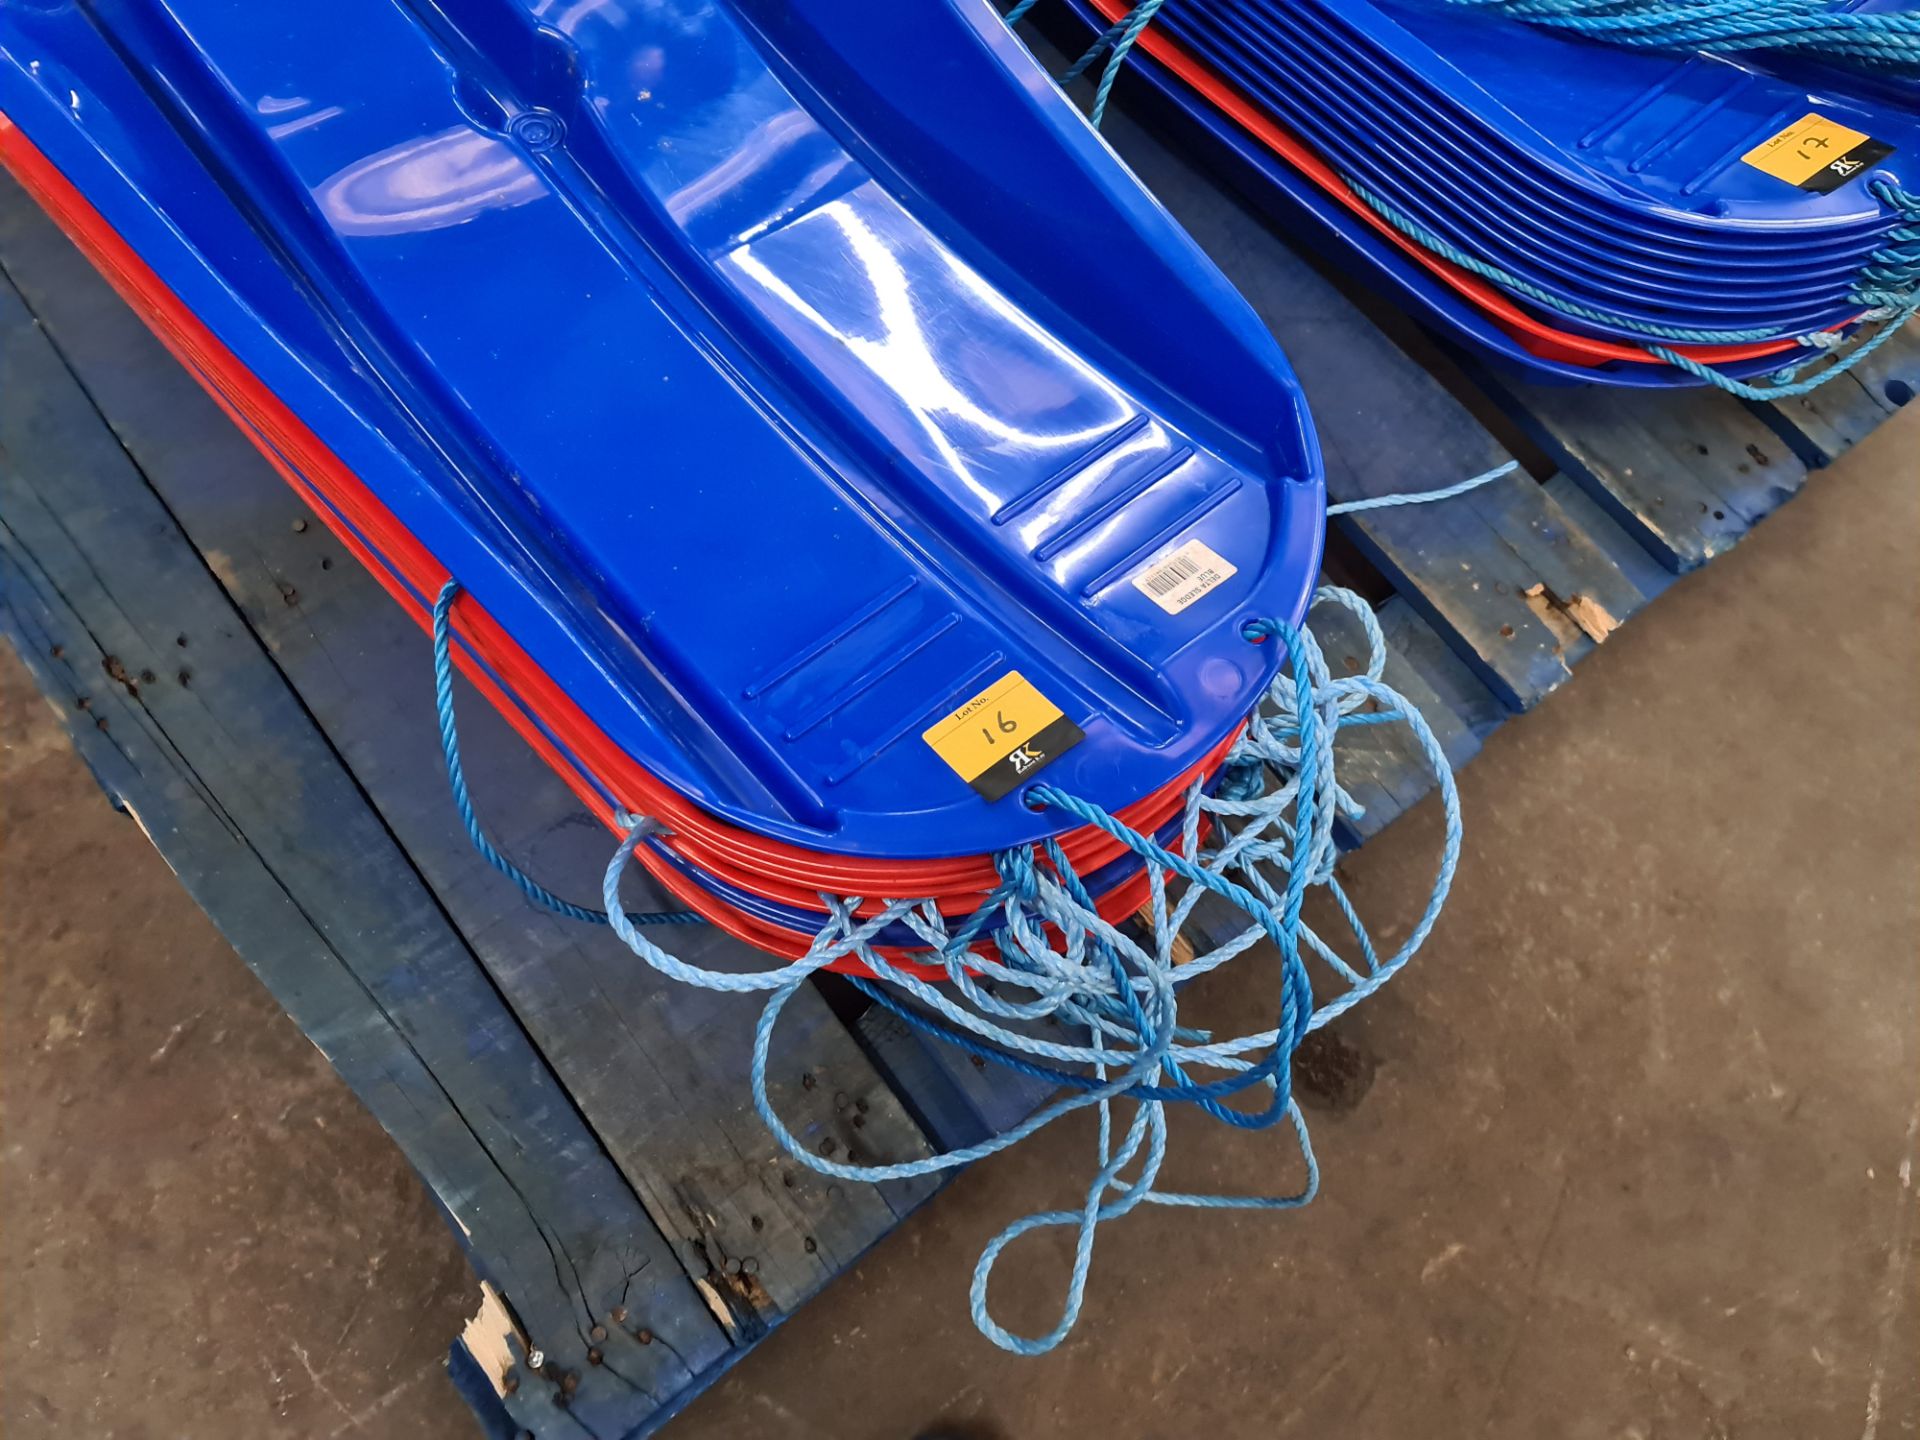 10 off Delta sledges - mixed lot of blue and red. NB - damage has been spotted to one sledge - Image 5 of 5